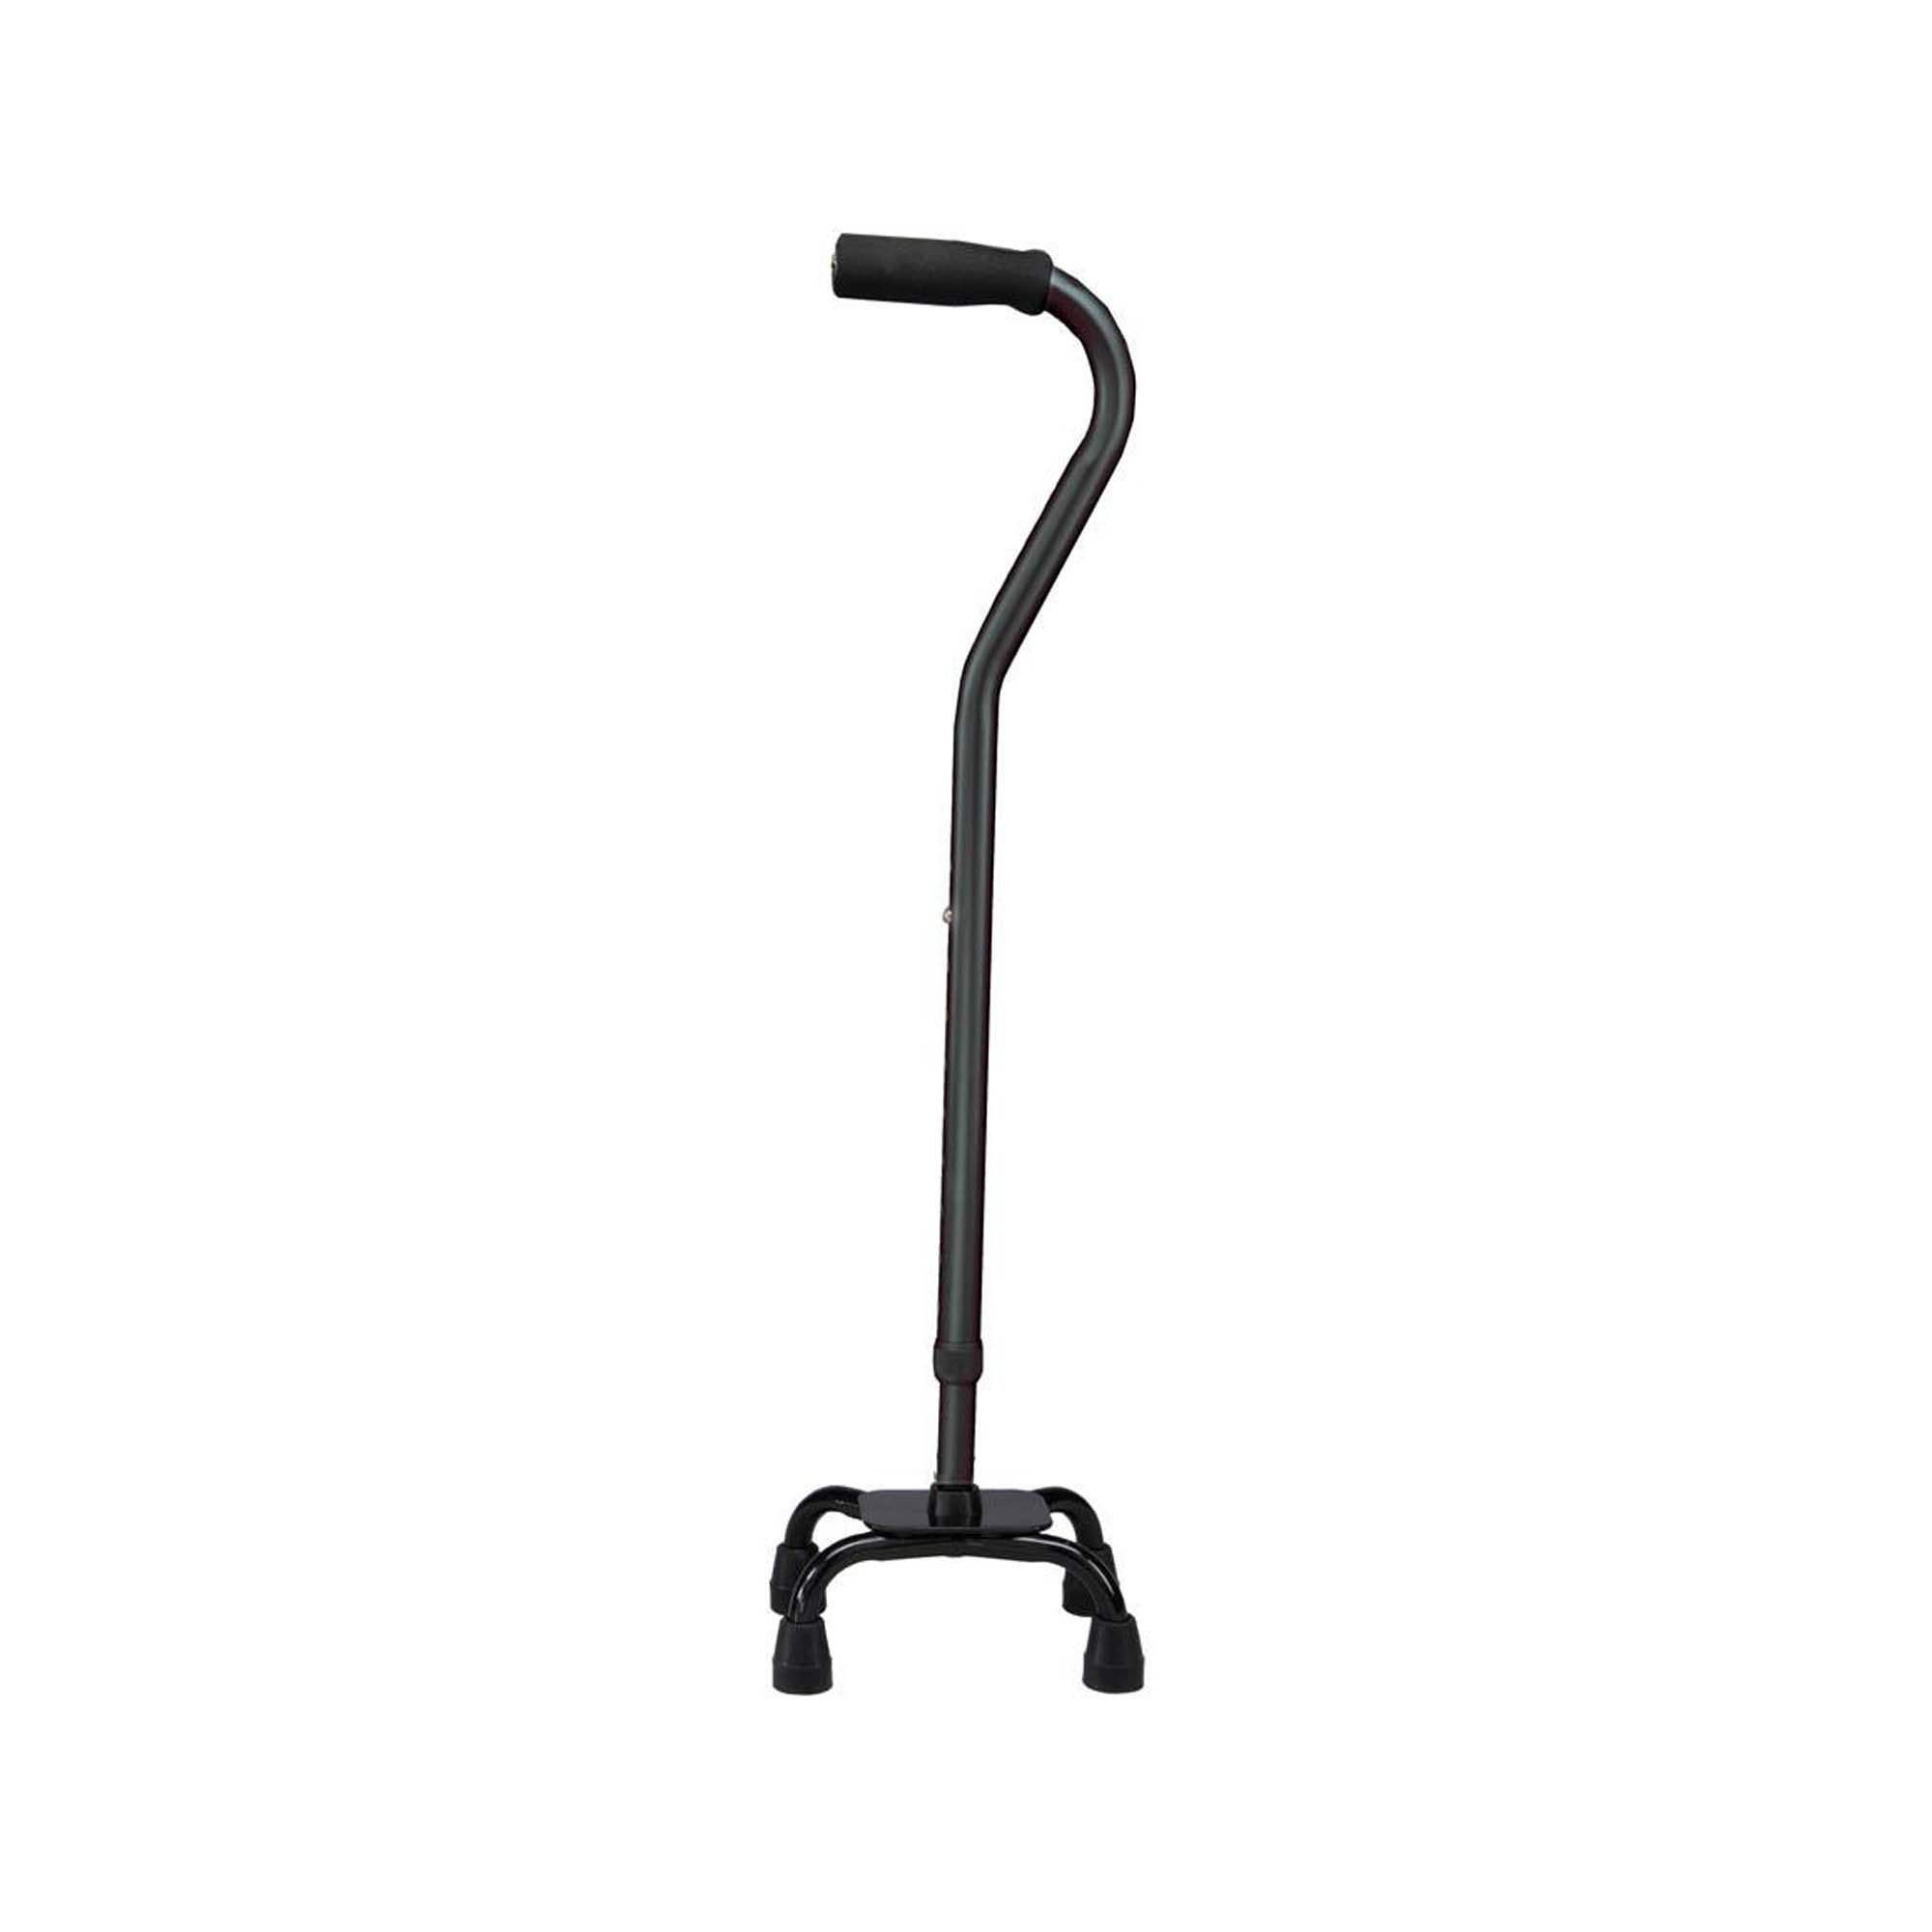 Small Base Quad Cane Carex® Aluminum 28 to 37 Inch Height Black